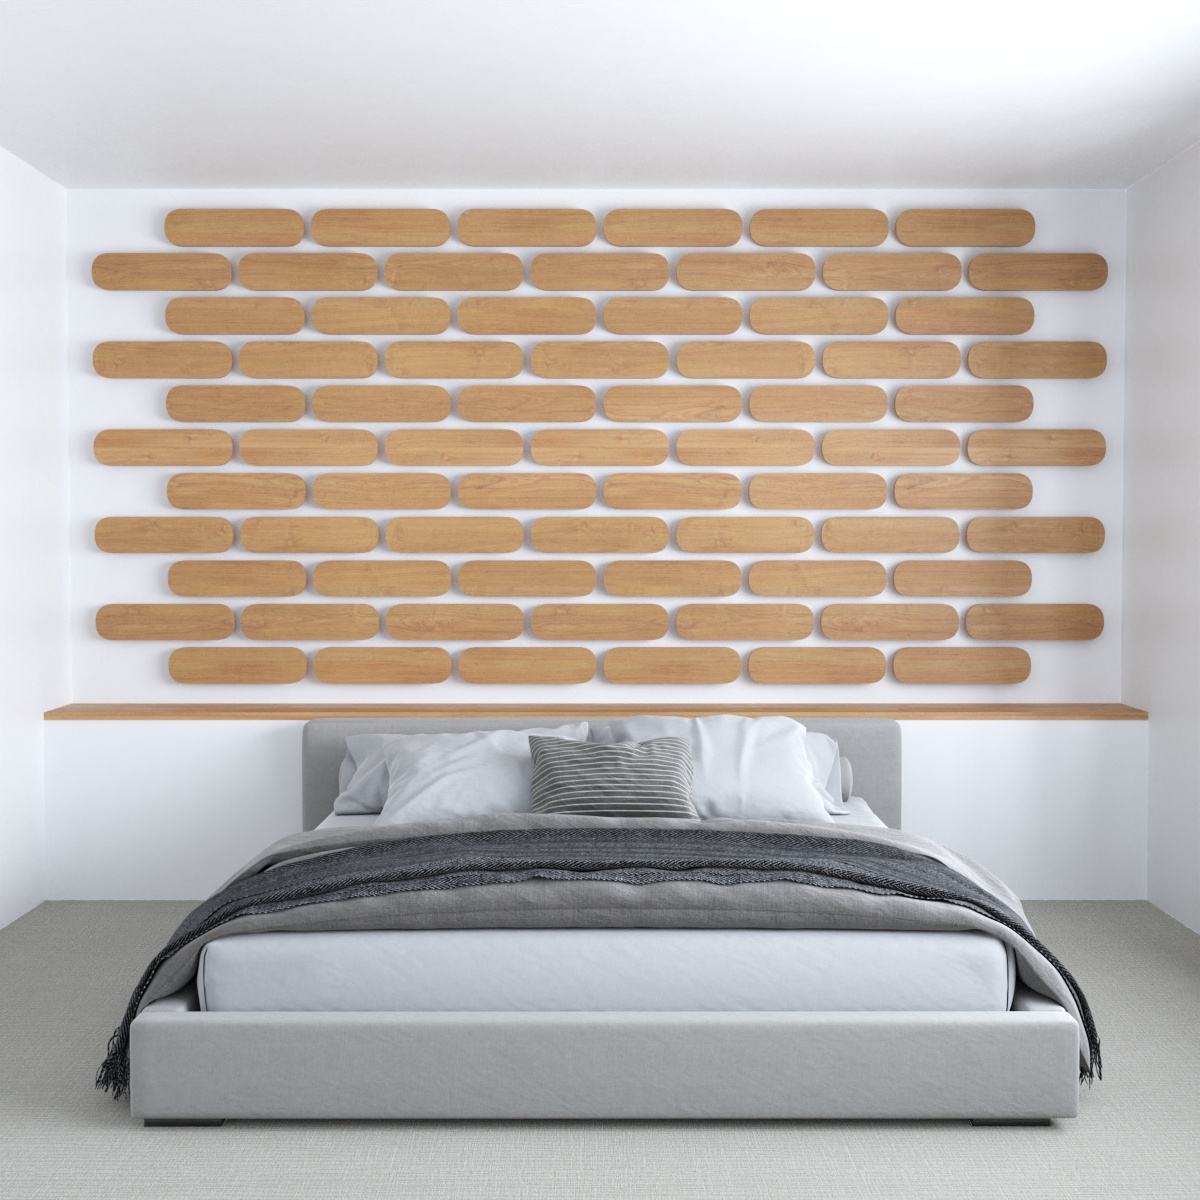 This wood accent wall is made up of a series of rounded rectangles, each the same length.